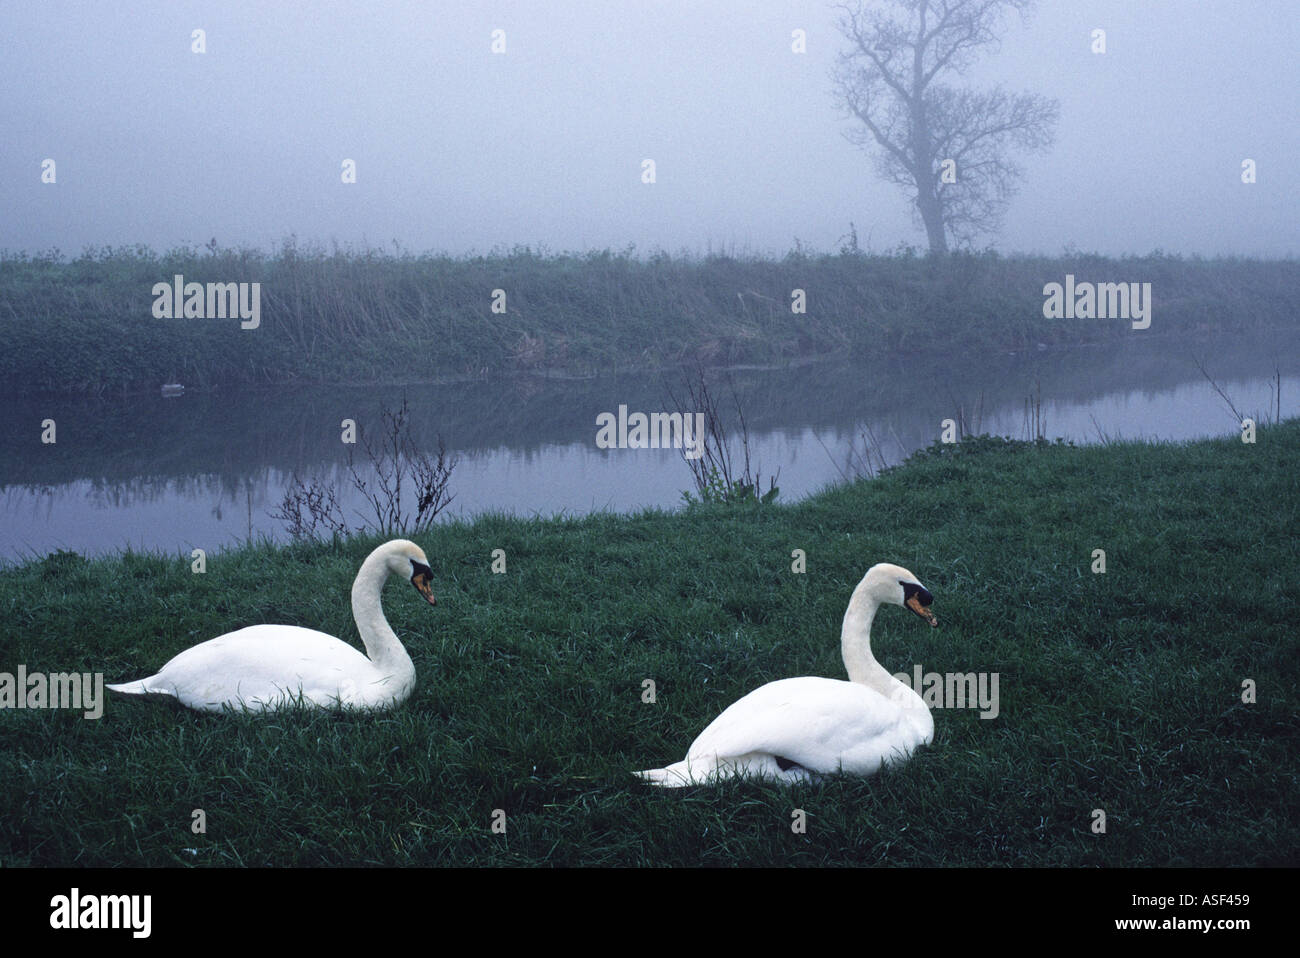 Two white swans on bank of River Cam on misty dawn near Grantchester Cambridge England Stock Photo